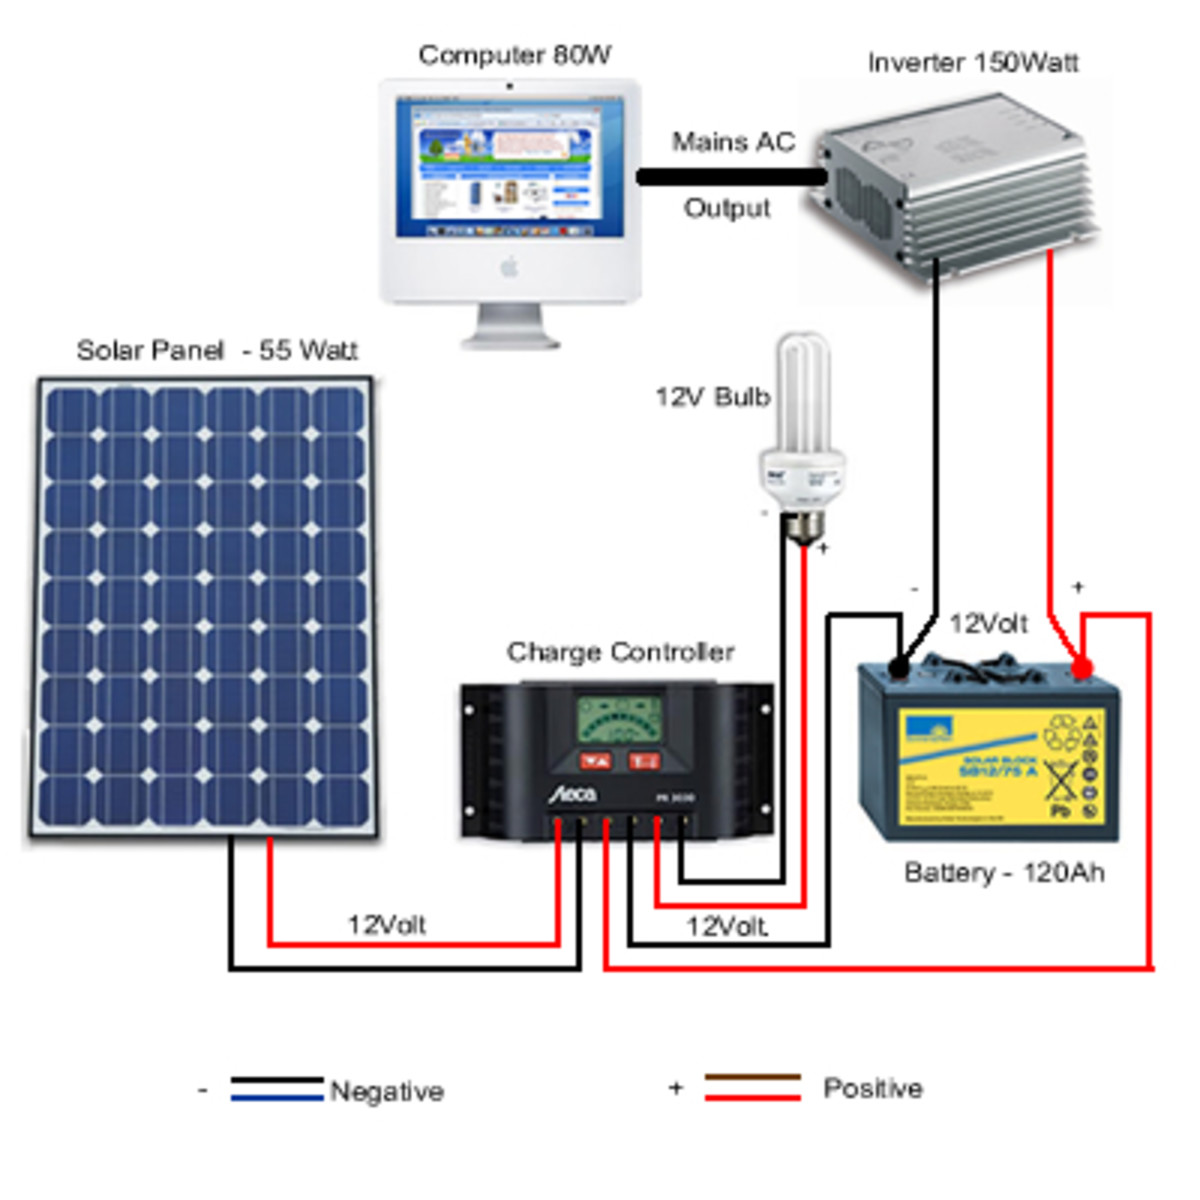 Simple Photovoltaic (Solar) Power System Setup for the Remote Home